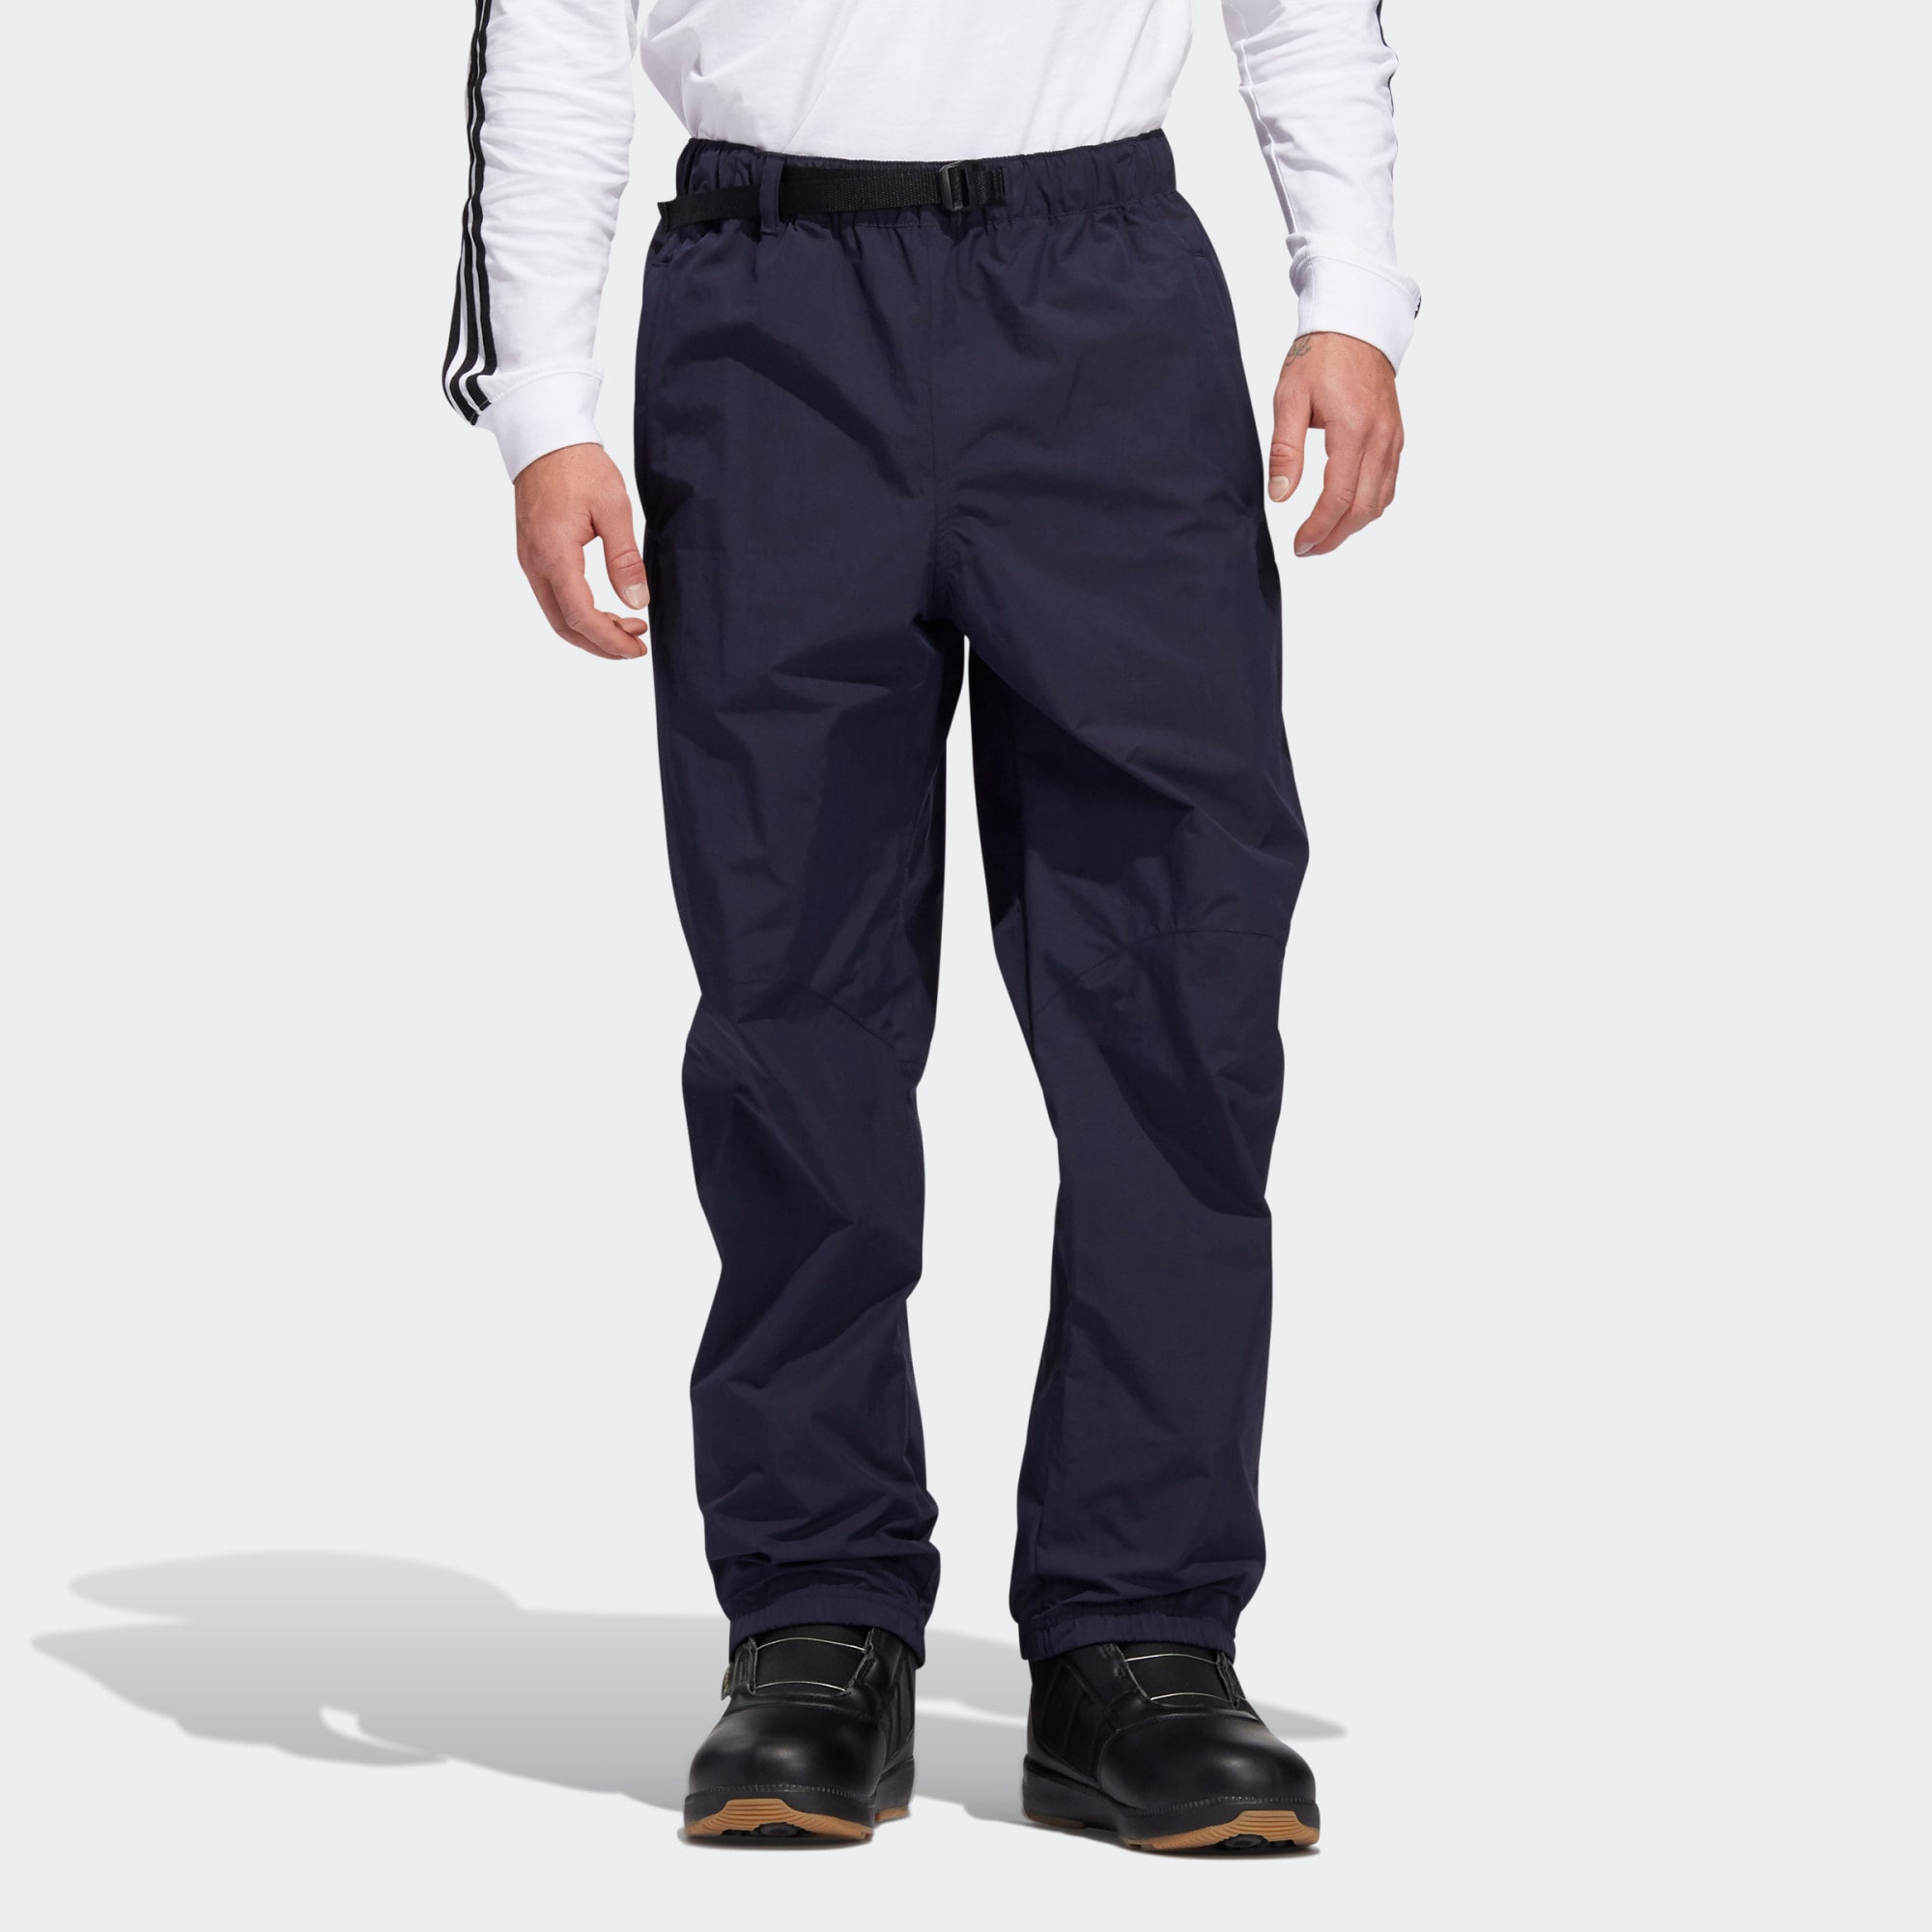 Legend Ink 2021 Adidas Mobility Snowboard Pants Front